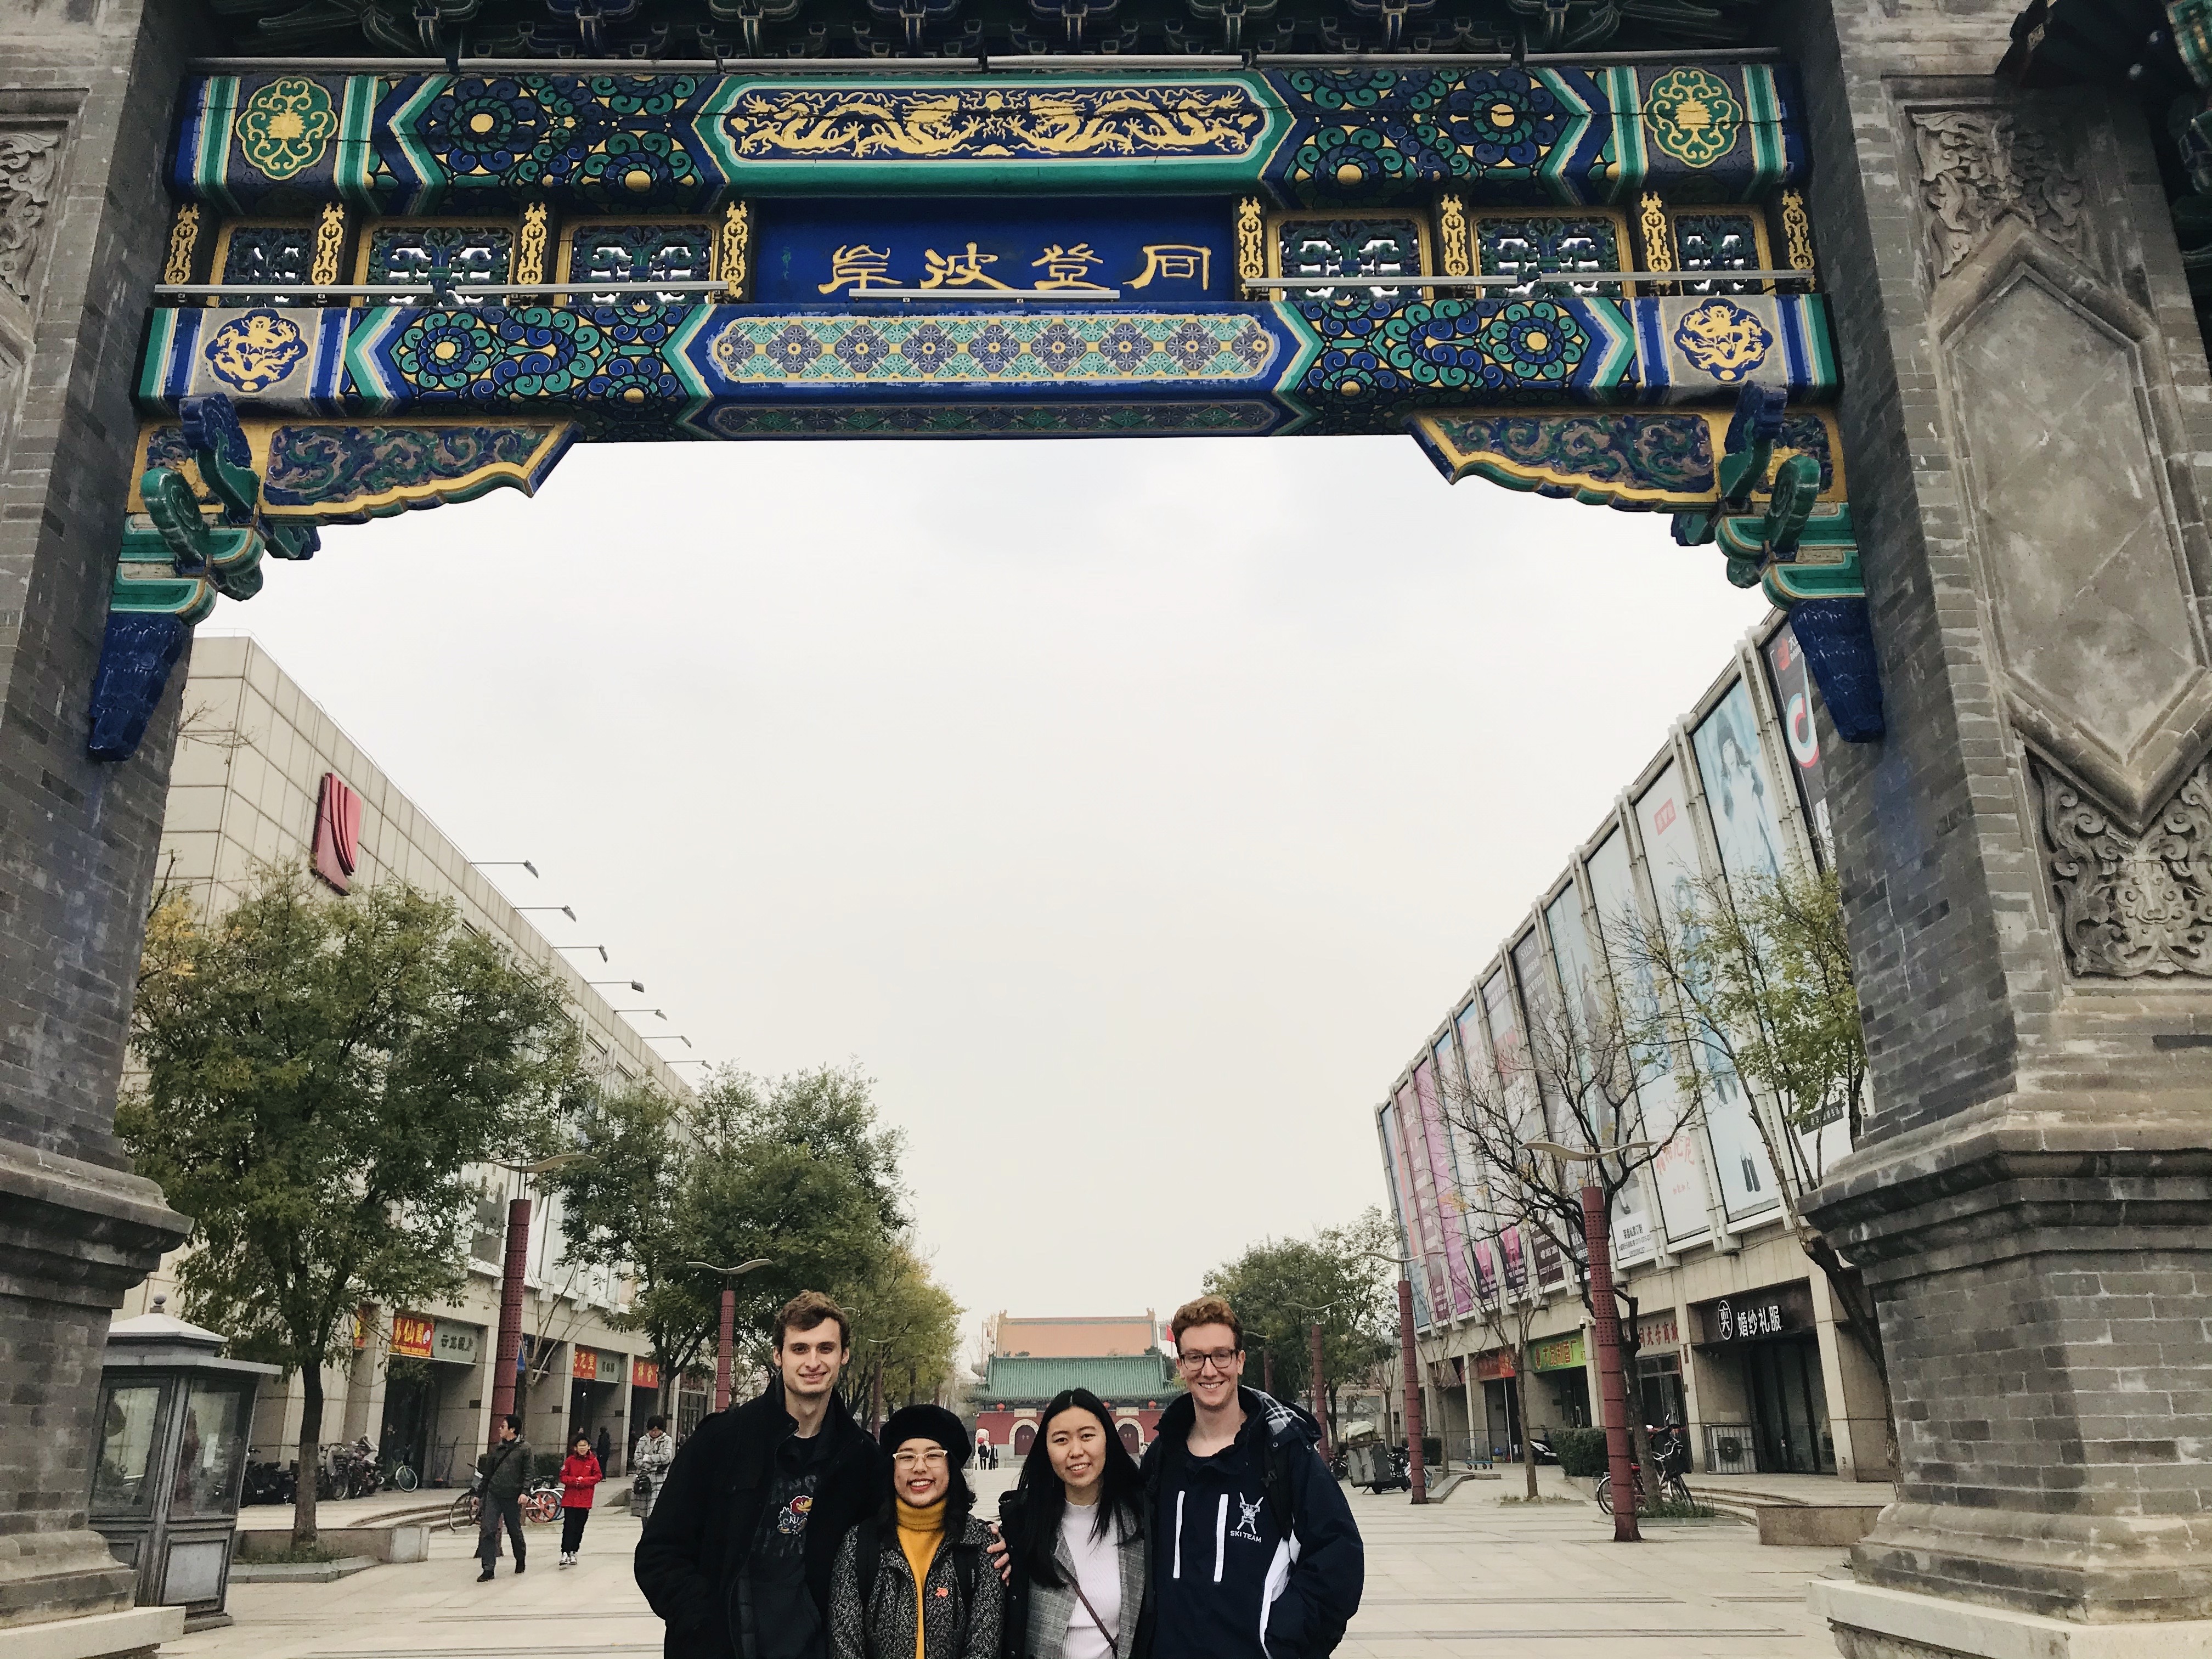 Students standing Underneath an arch in Tianjin